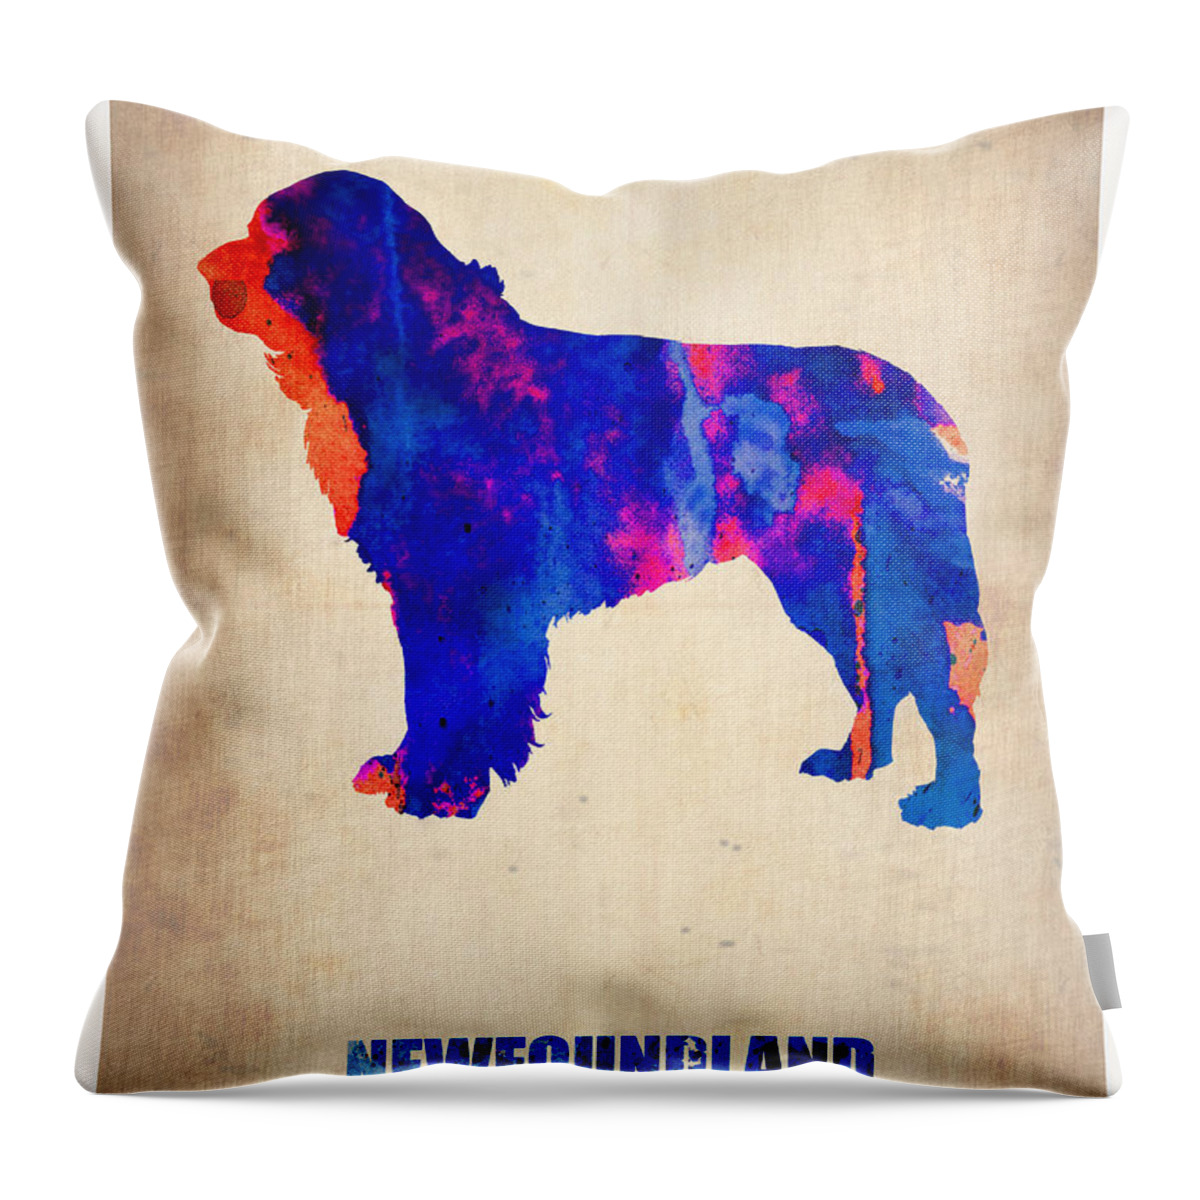 Newfoundland Throw Pillow featuring the painting Newfoundland Poster by Naxart Studio